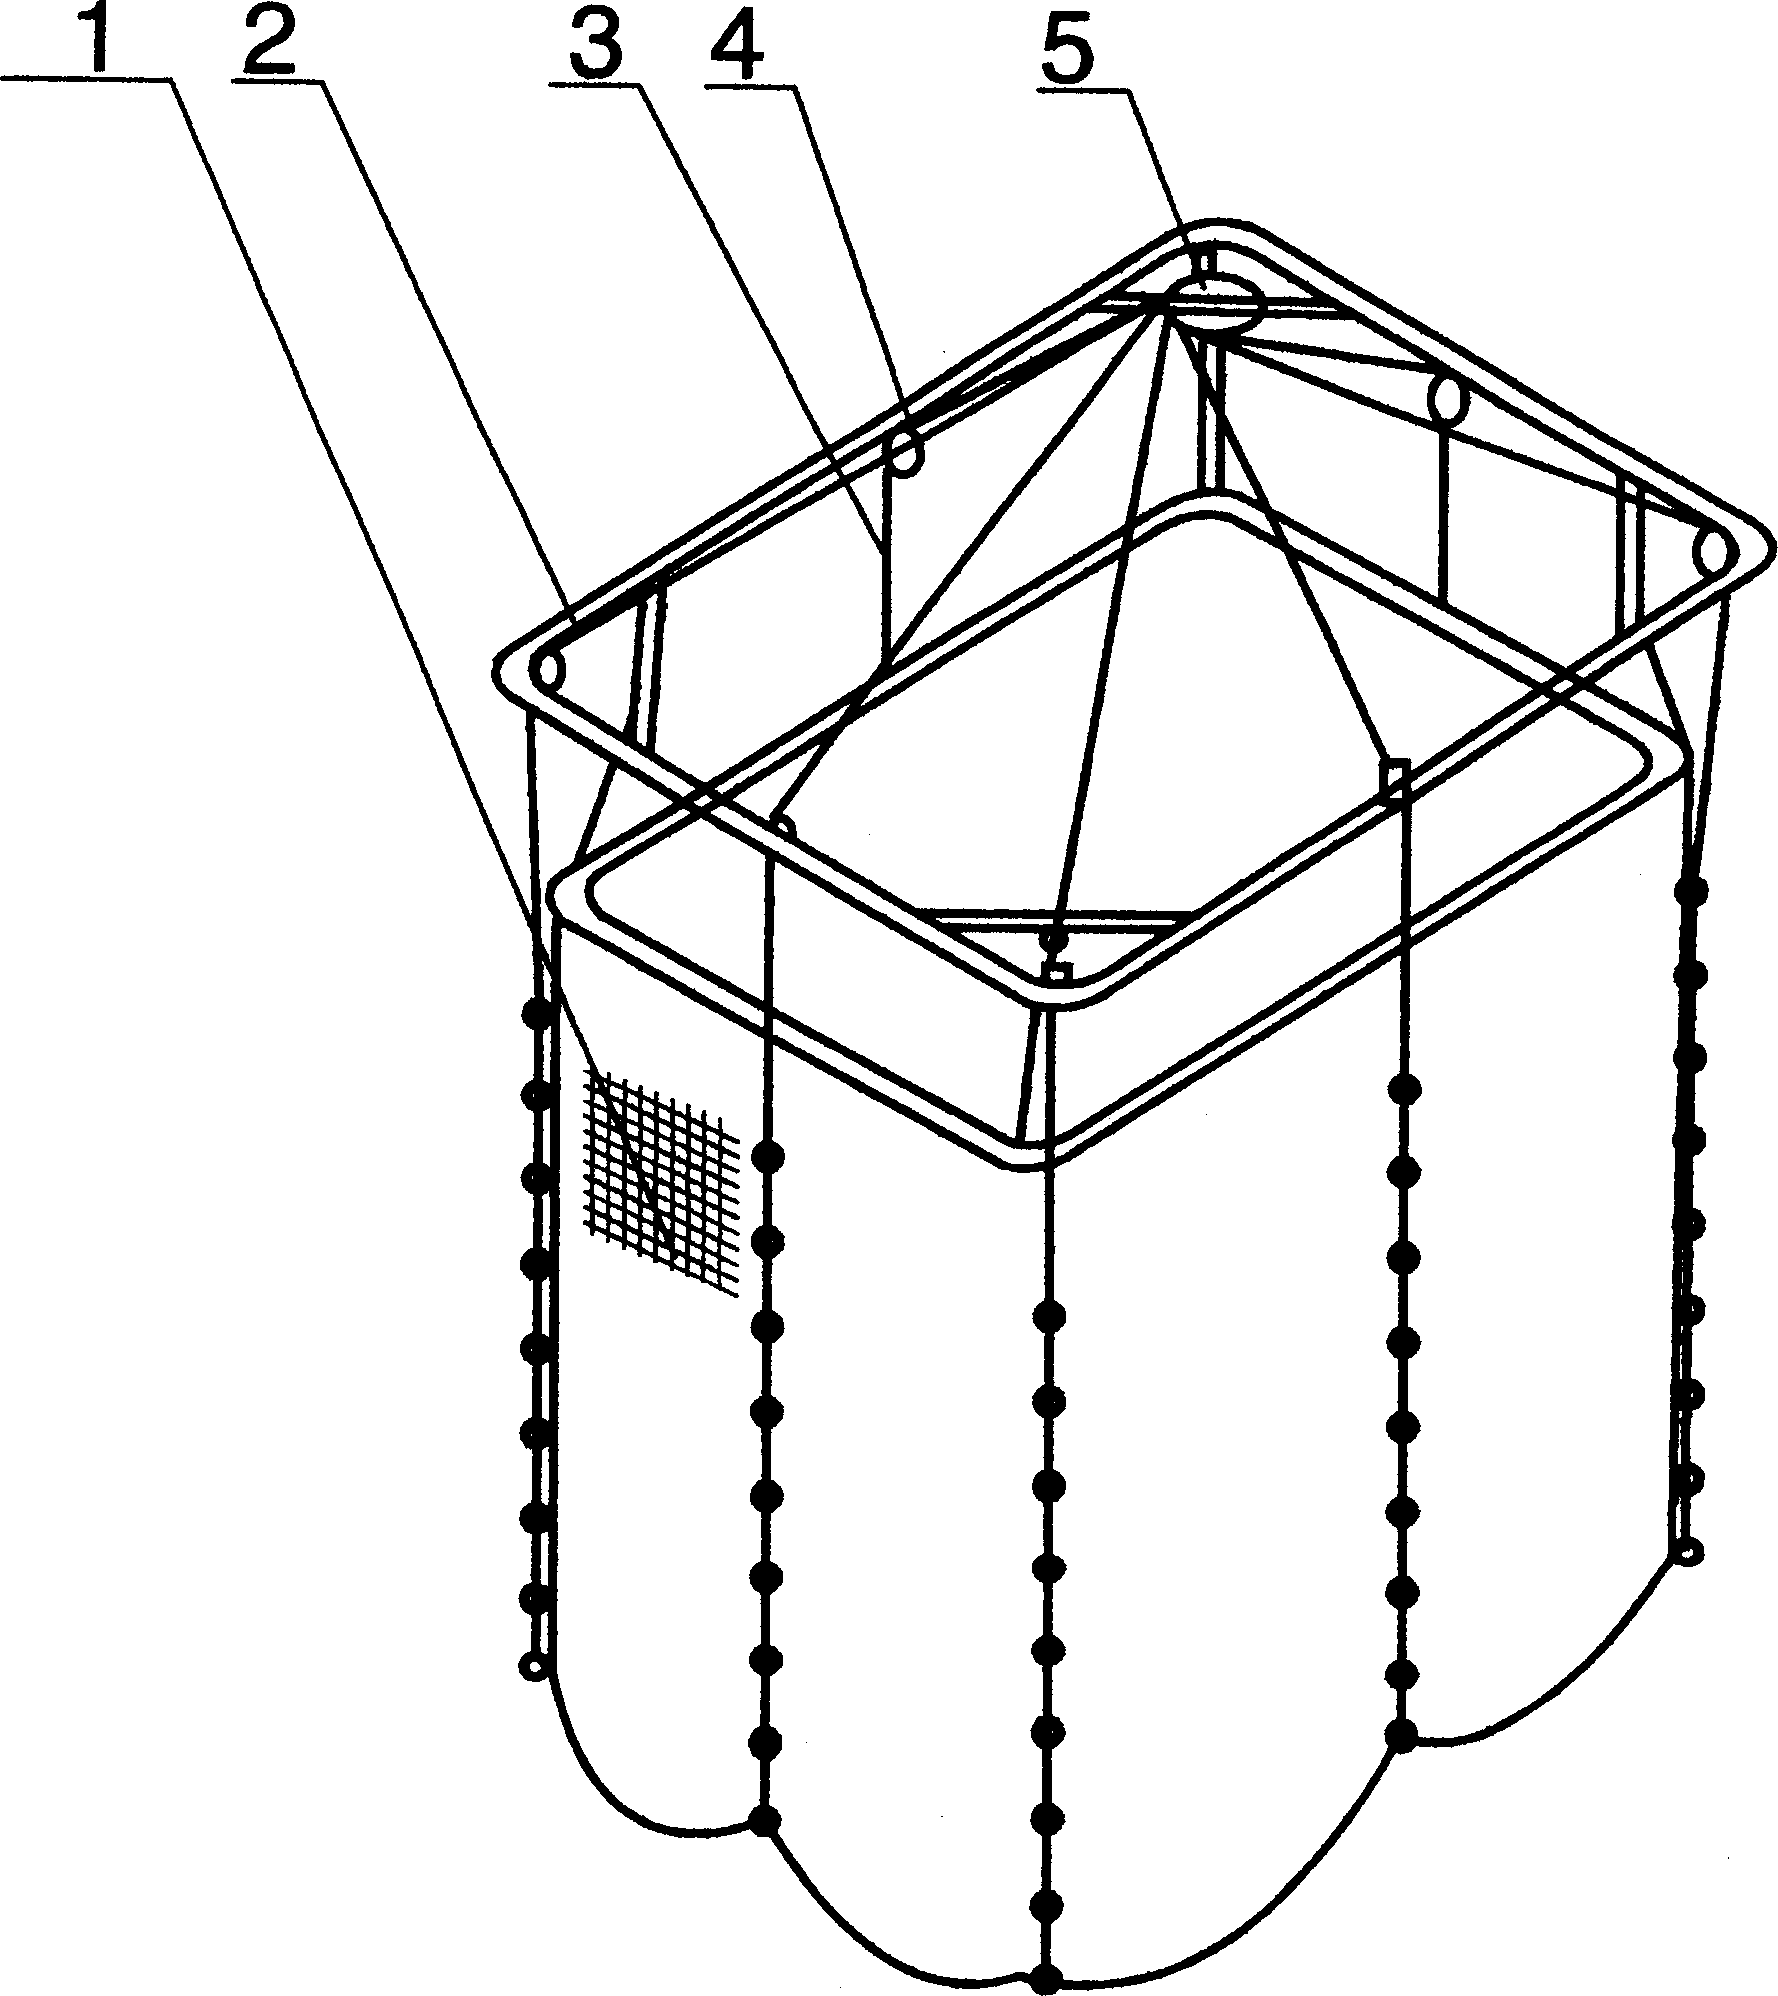 Mosquito net elevator with clutch